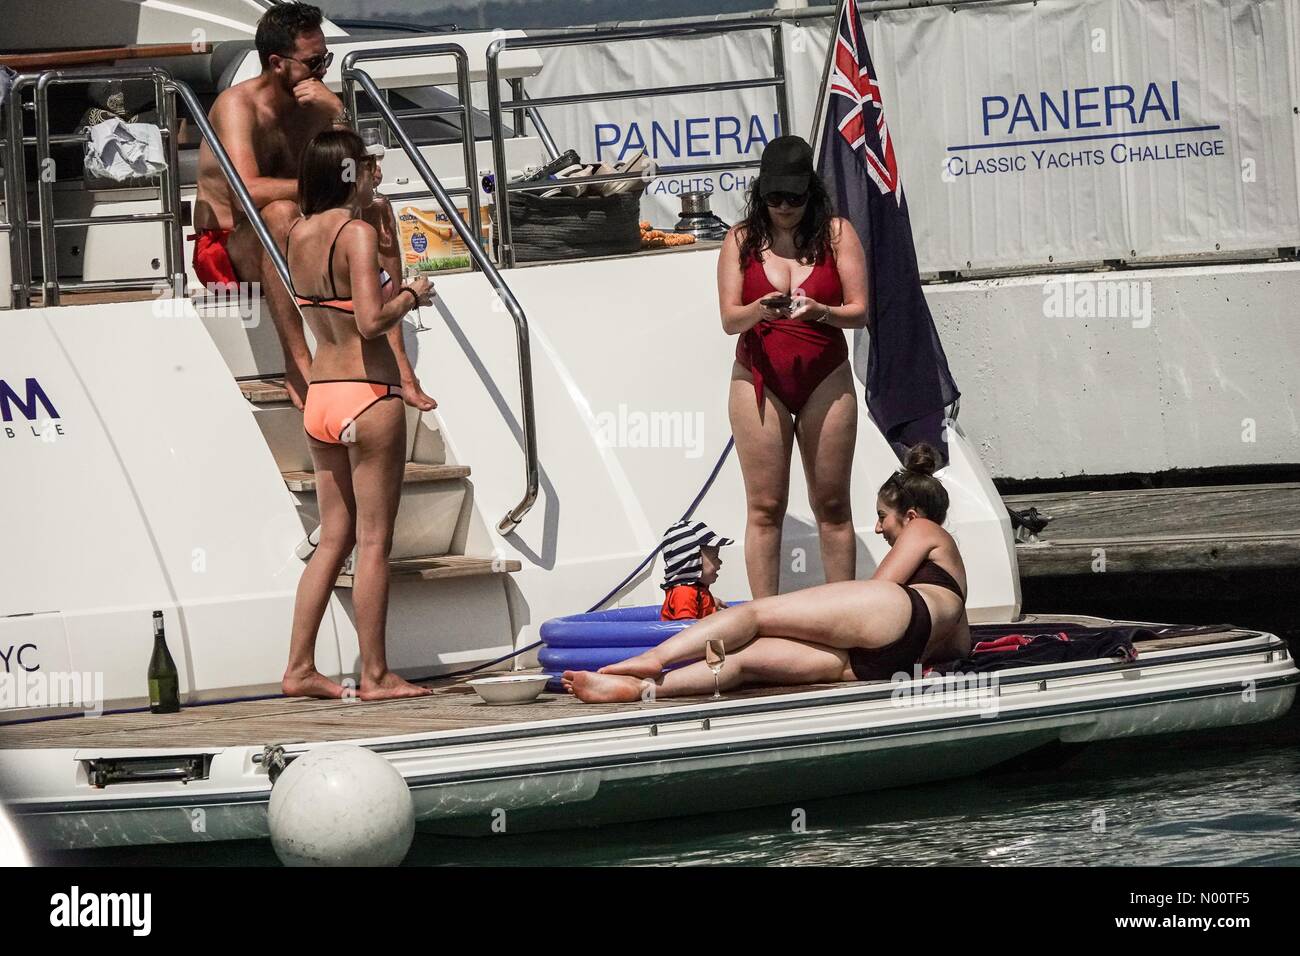 Cowes, UK, 14 July 2018. UK Weather: Sunny in Cowes. Yacht Haven Marina, West Cowes. 14th July 2018. Hot and sunny weather on the Isle of Wight today. Relaxing in style in West Cowes. Credit: jamesjagger/StockimoNews/Alamy Live News Stock Photo